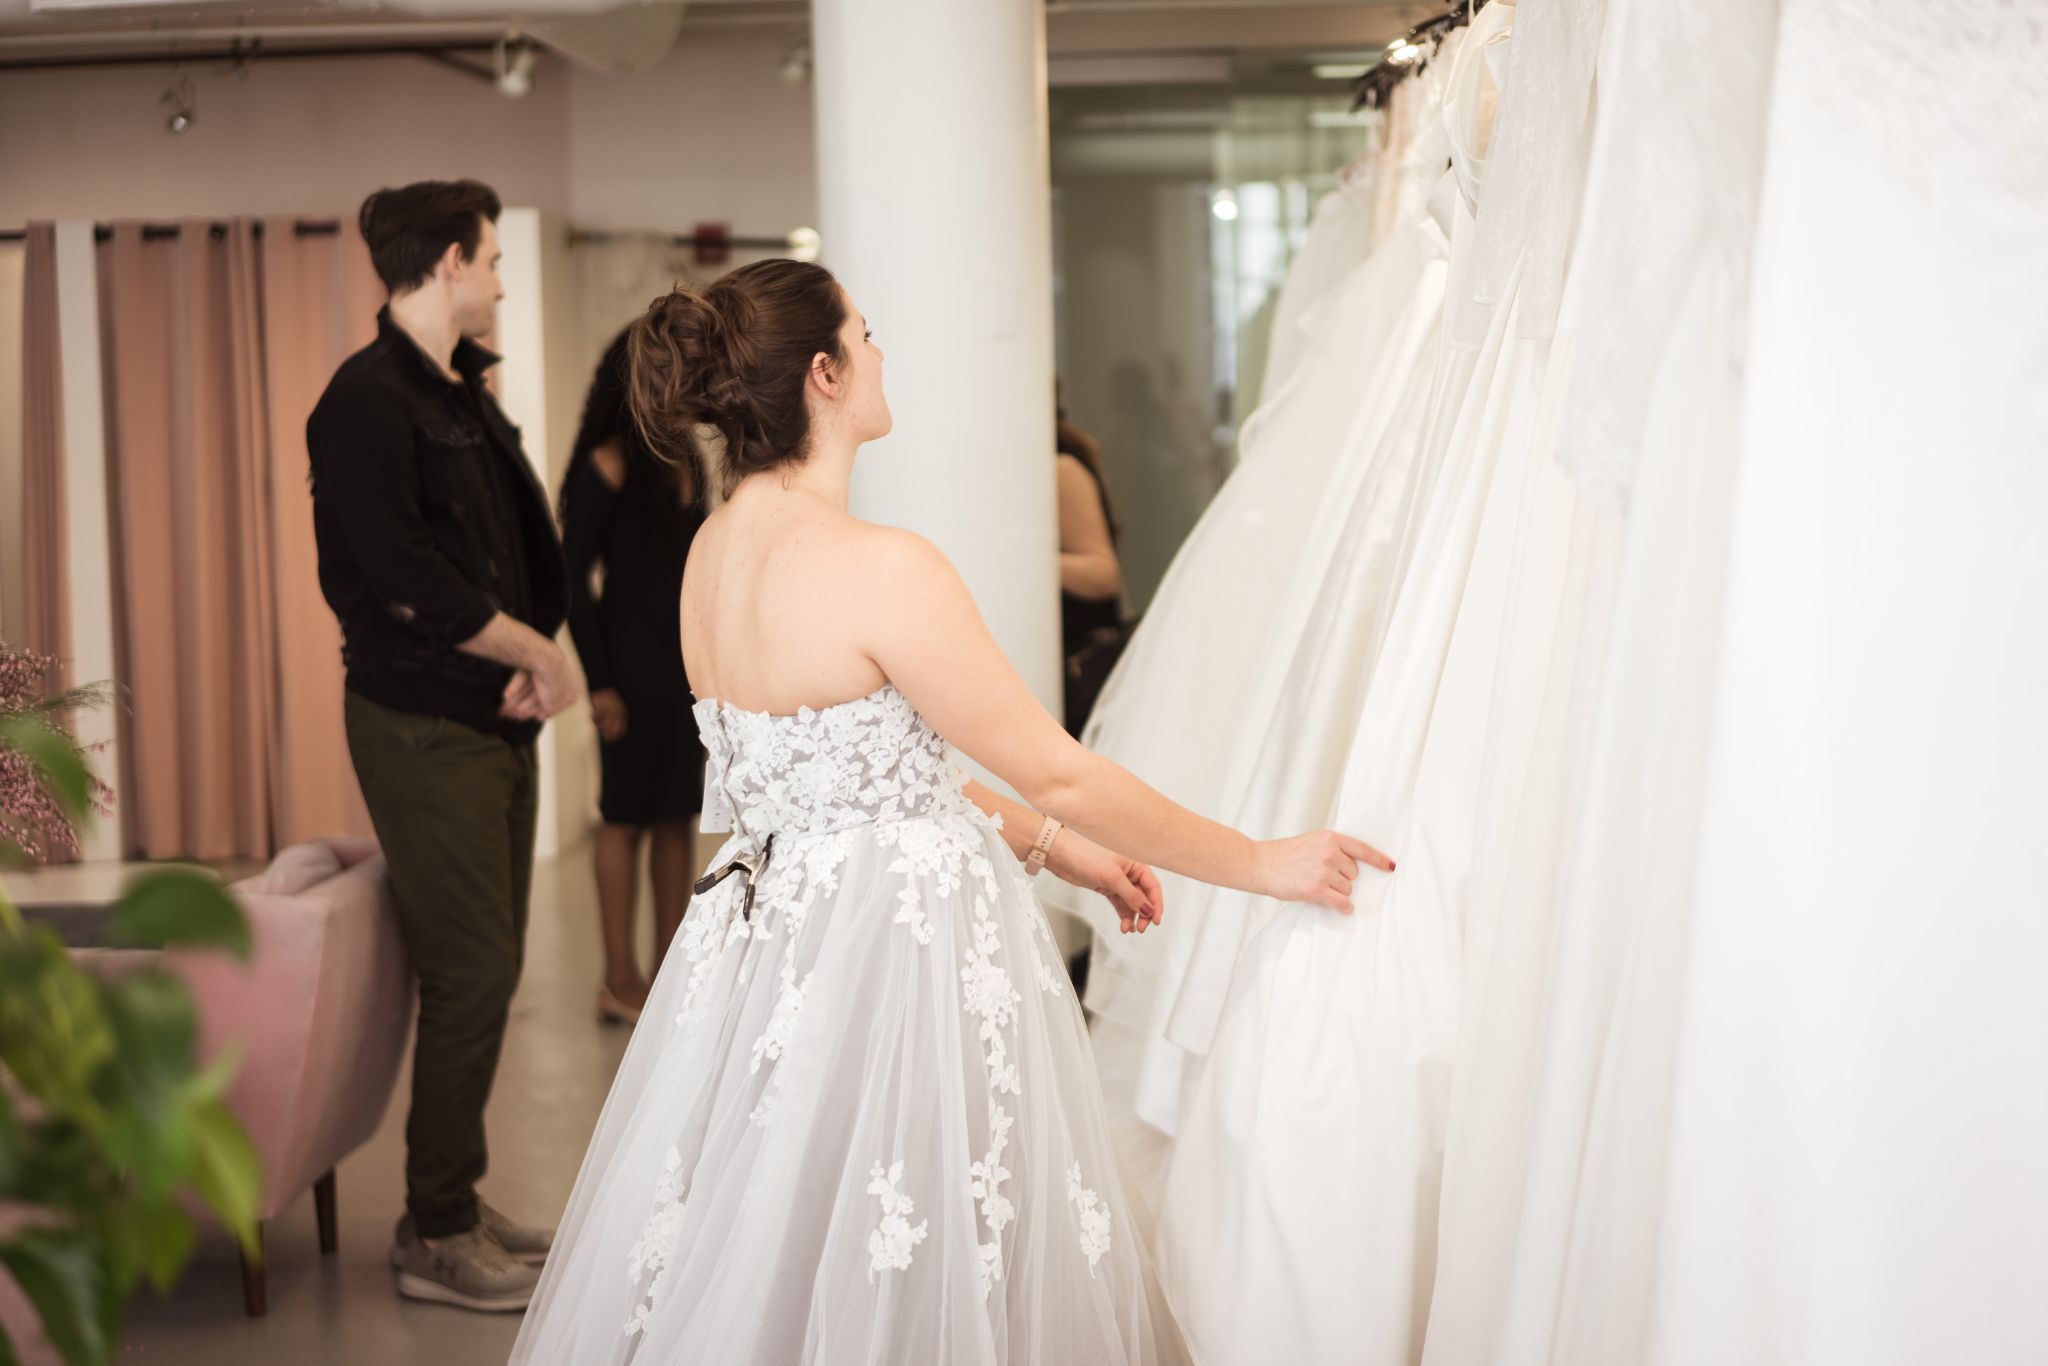 10 Things No One Tells You About Wedding Dress Shopping